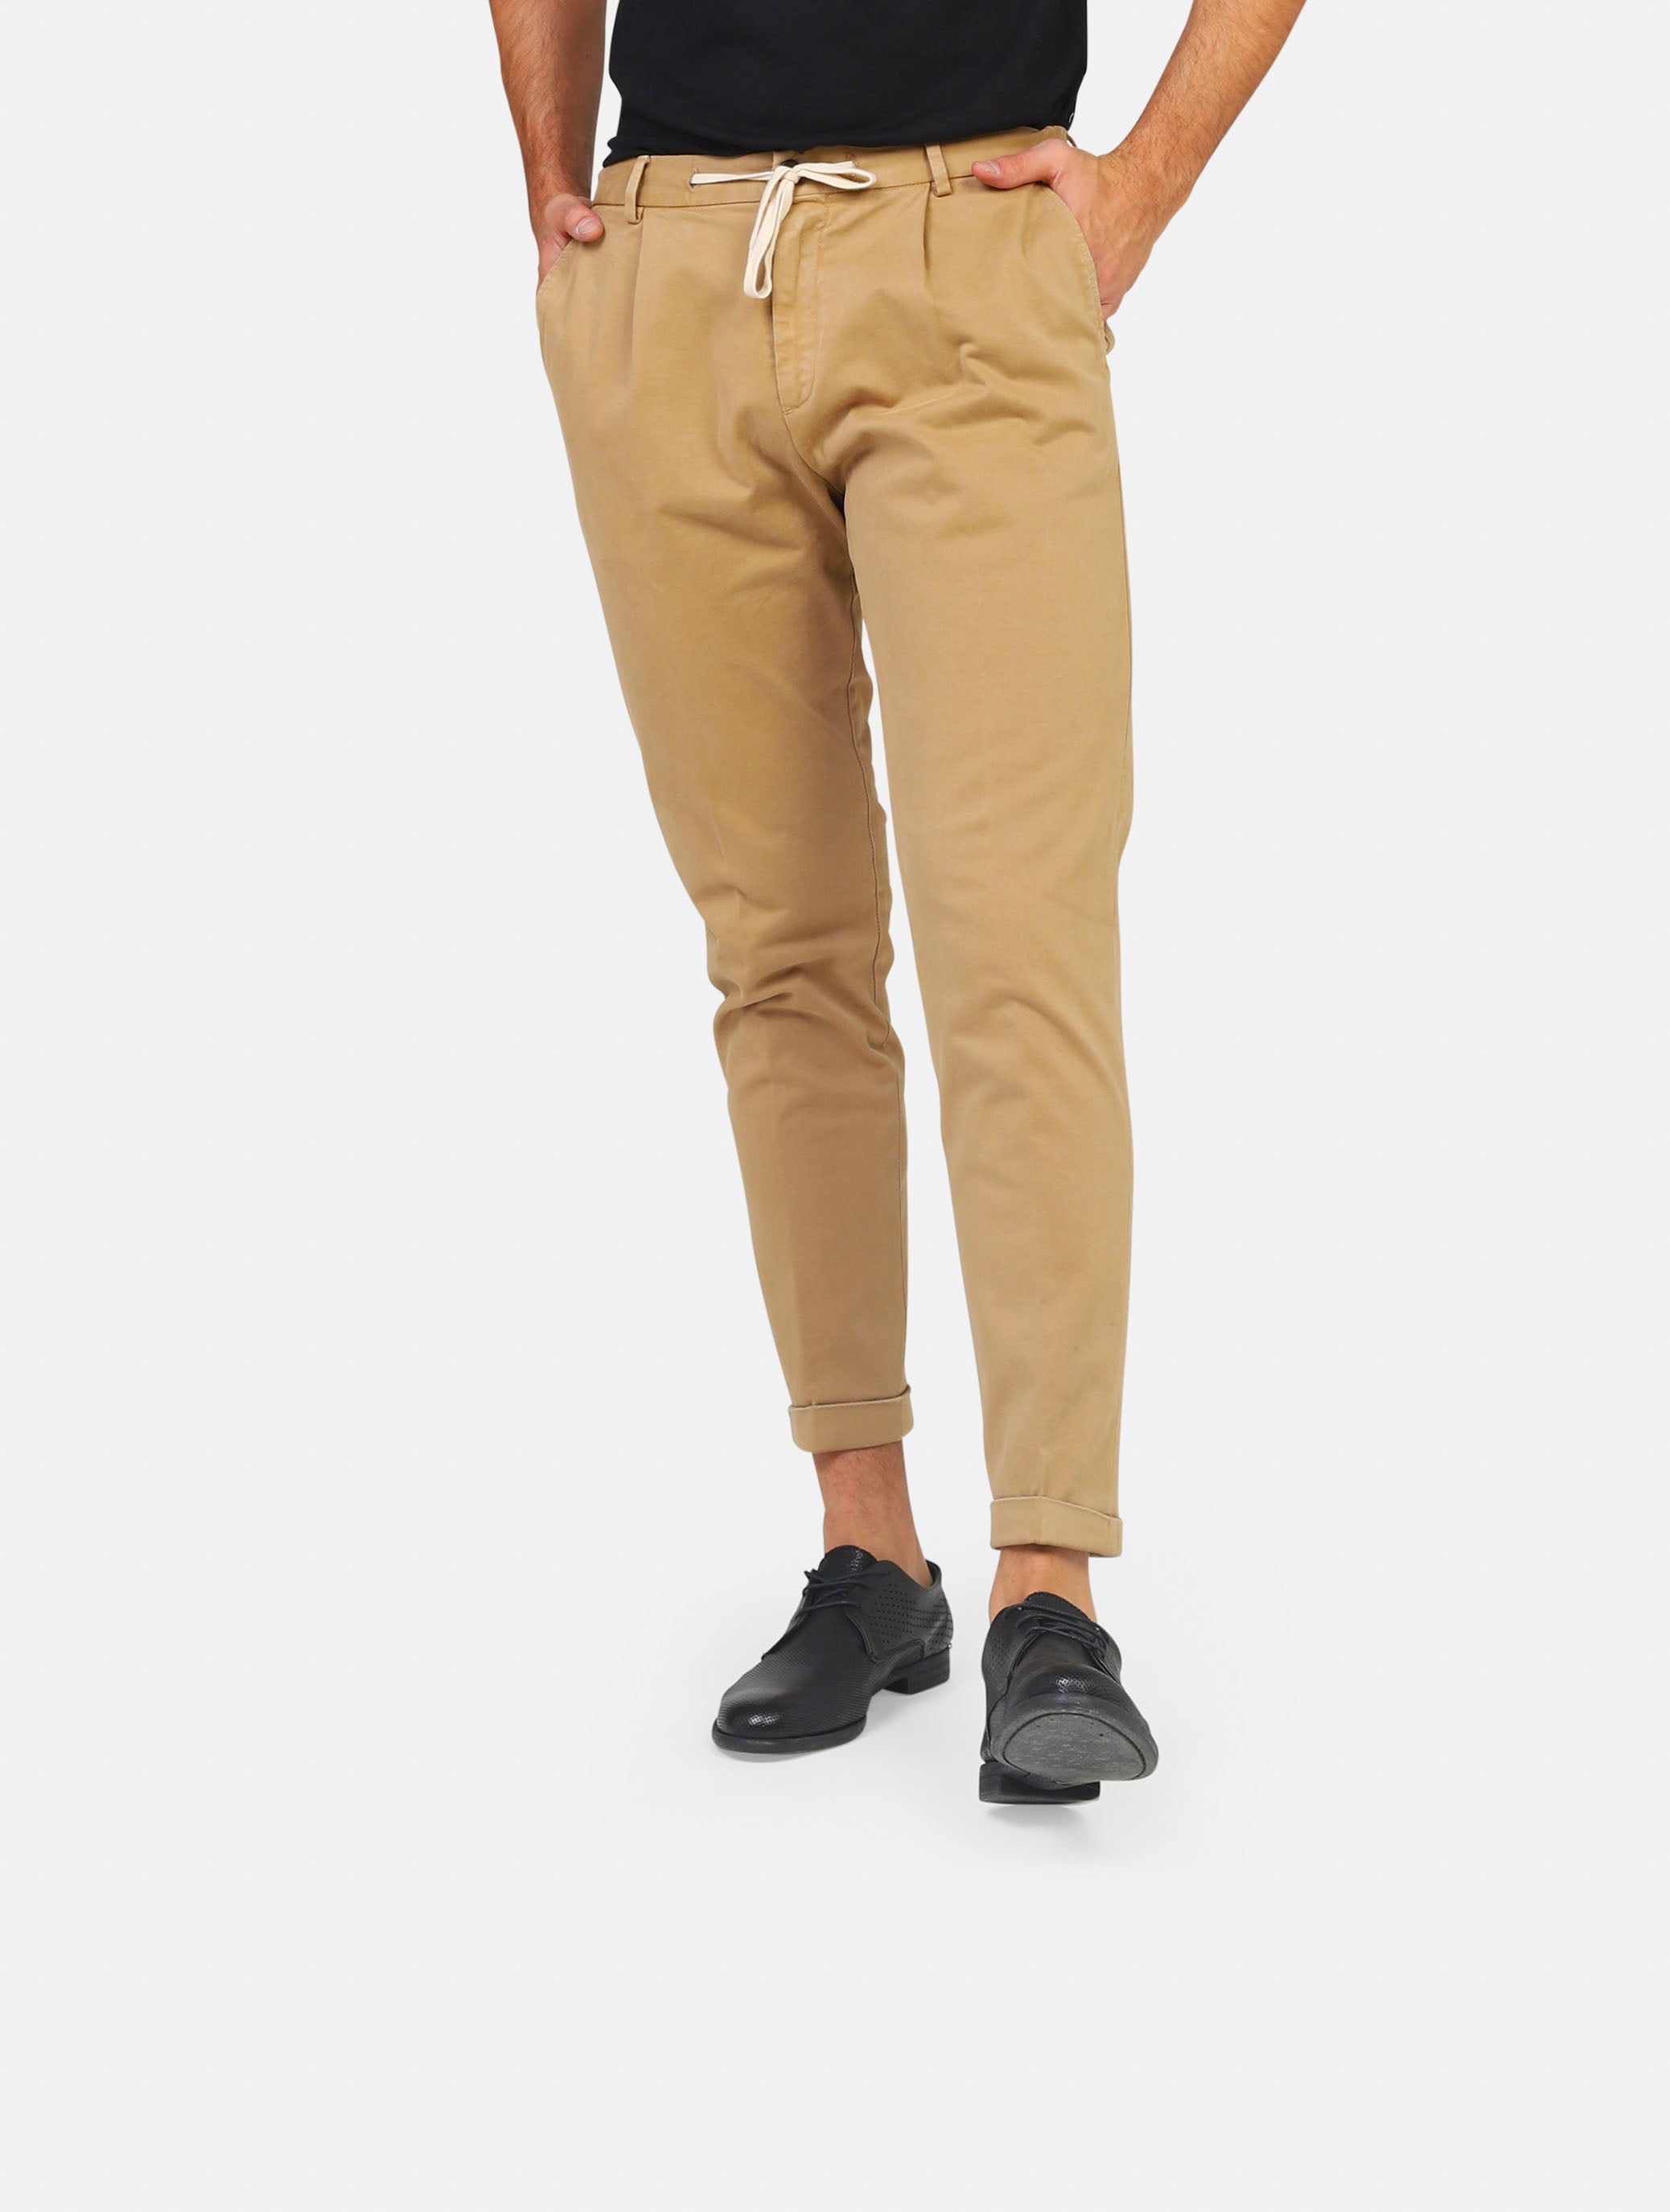 pantalone OUTFIT - OF1CT00P003CAMEL